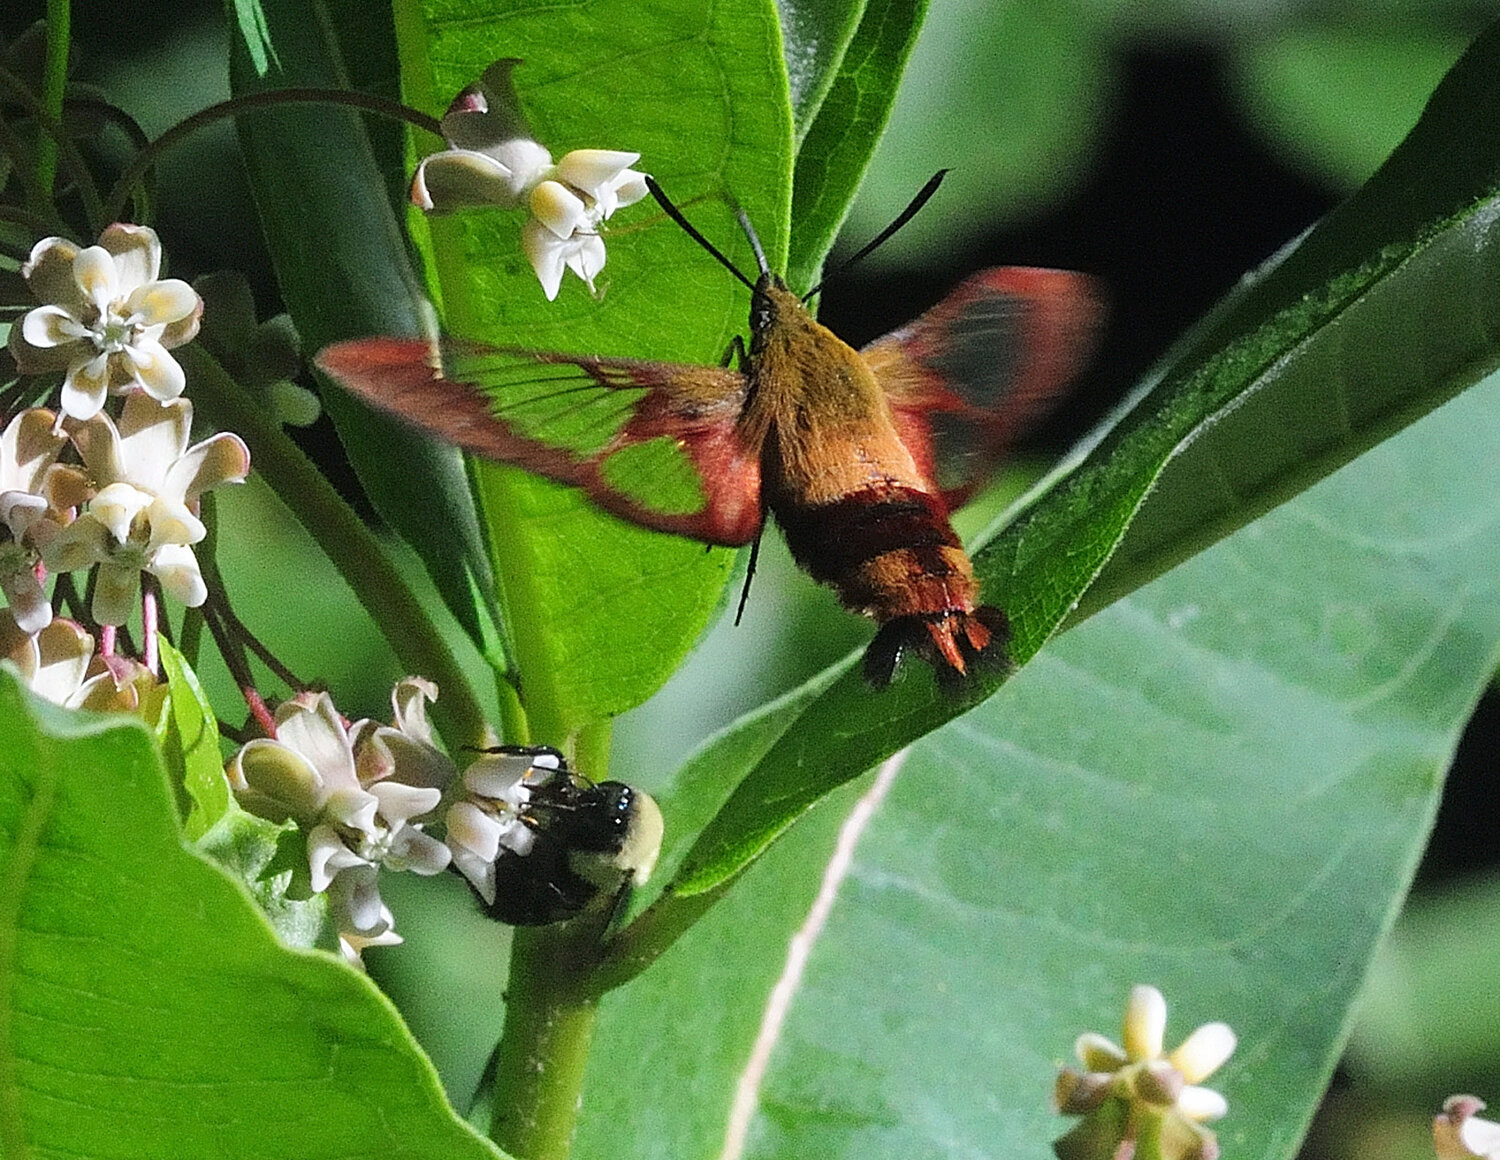 This hummingbird clearwing moth and a bumblebee were found sharing nectar from the same milkweed plant.  This moth is fascinating to watch as it mimics a ruby-throated hummingbird, hovering near flowers and taking nectar with its long proboscis while in flight.  Even its wing-beat frequency is similar, with 85 Hz for the moth vs. 60-80 for the hummingbird, so they might sound similar, though the moth might not seem as loud.